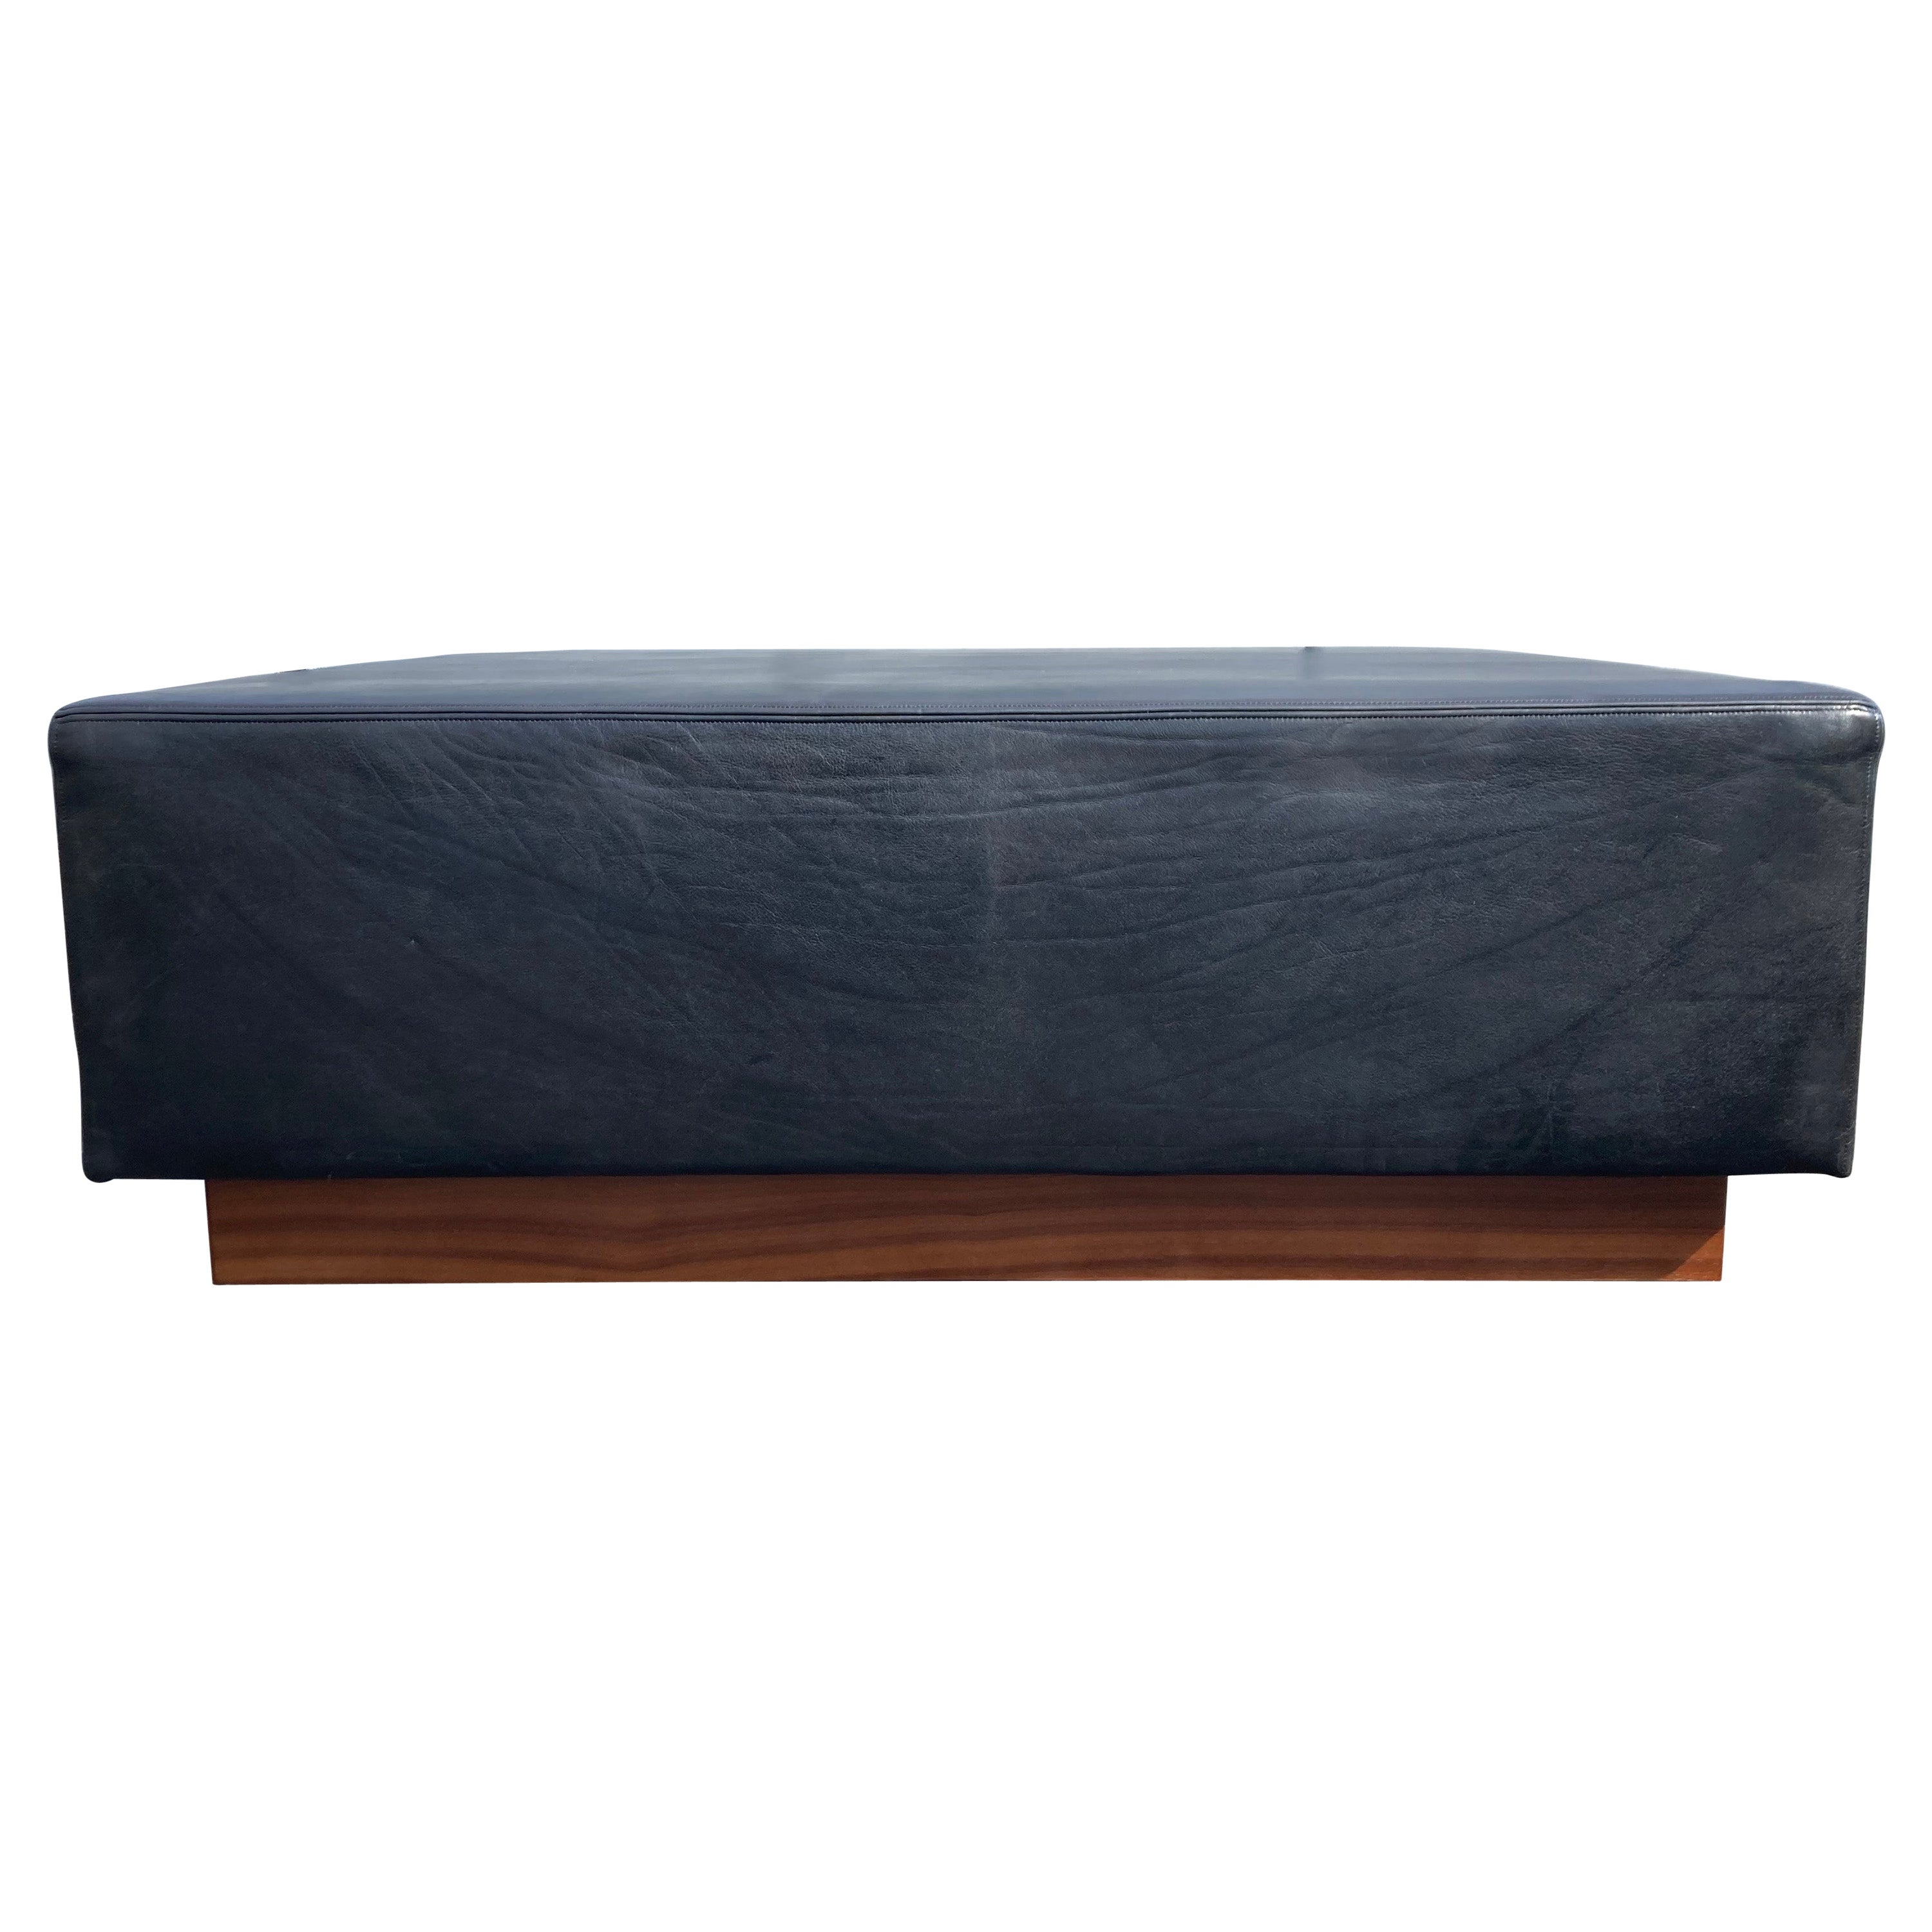 Large Black Leather Ottoman Bench Daybed, Mid-Century Modern Style For Sale